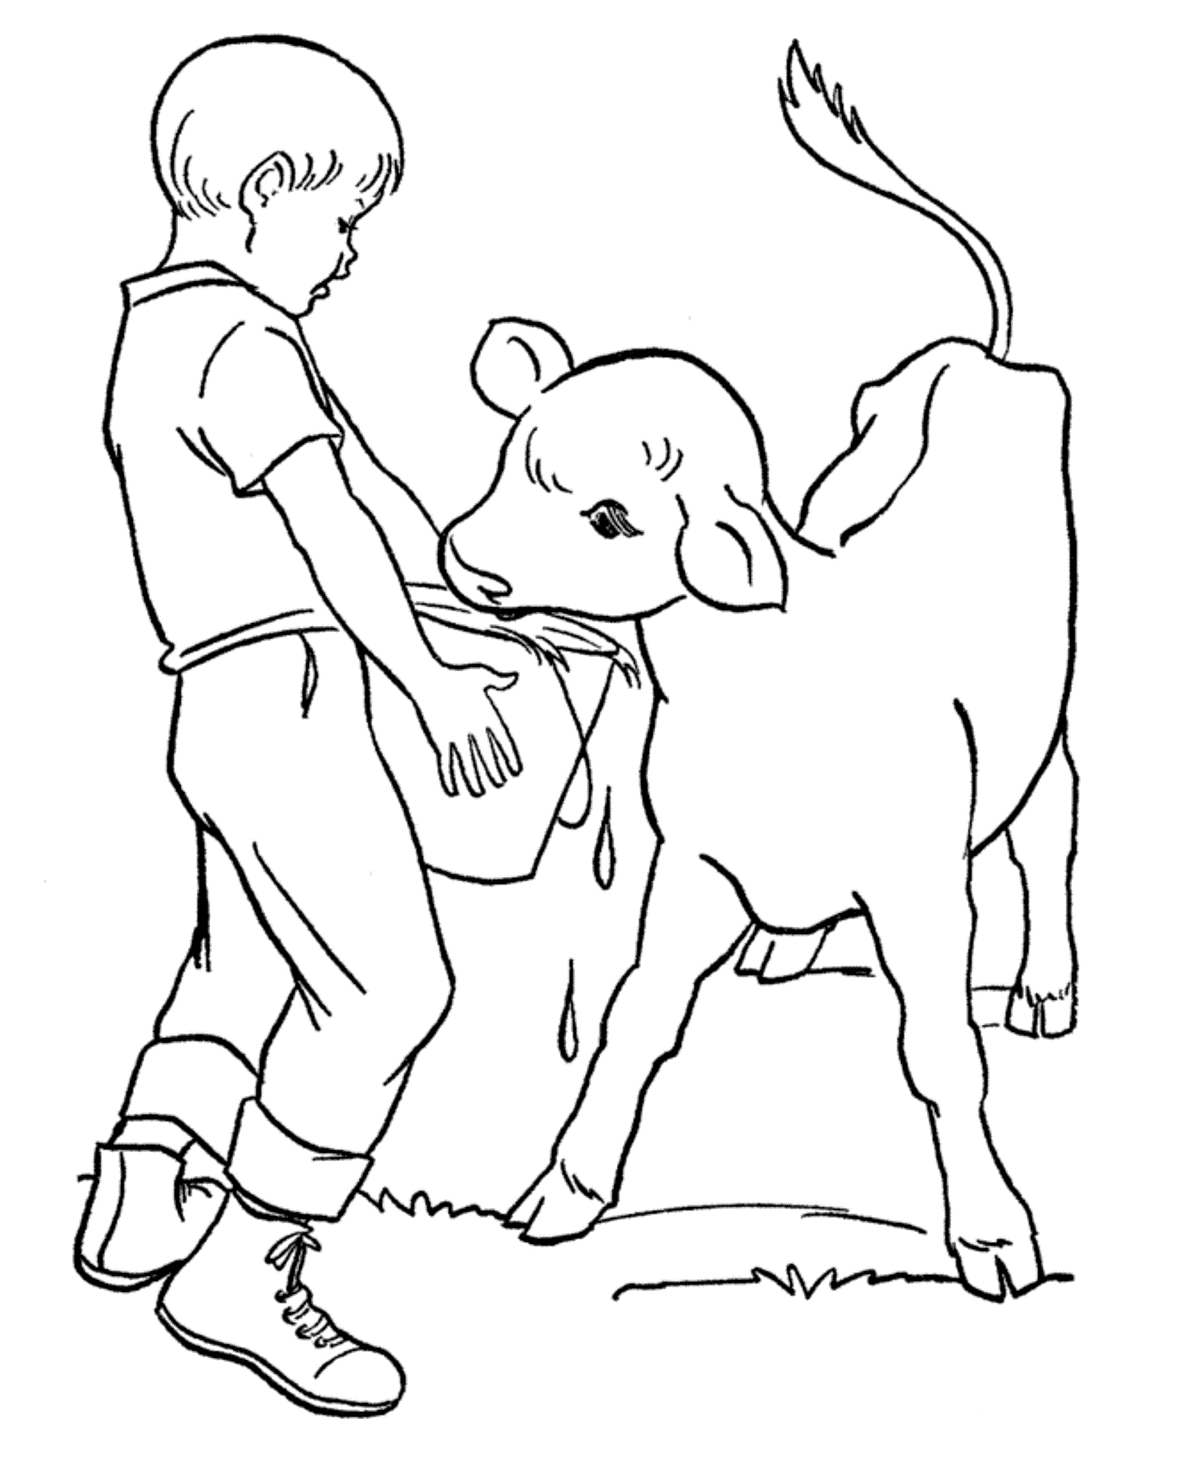 Feeds The Calf Farm Animal S00f7 Coloring Page